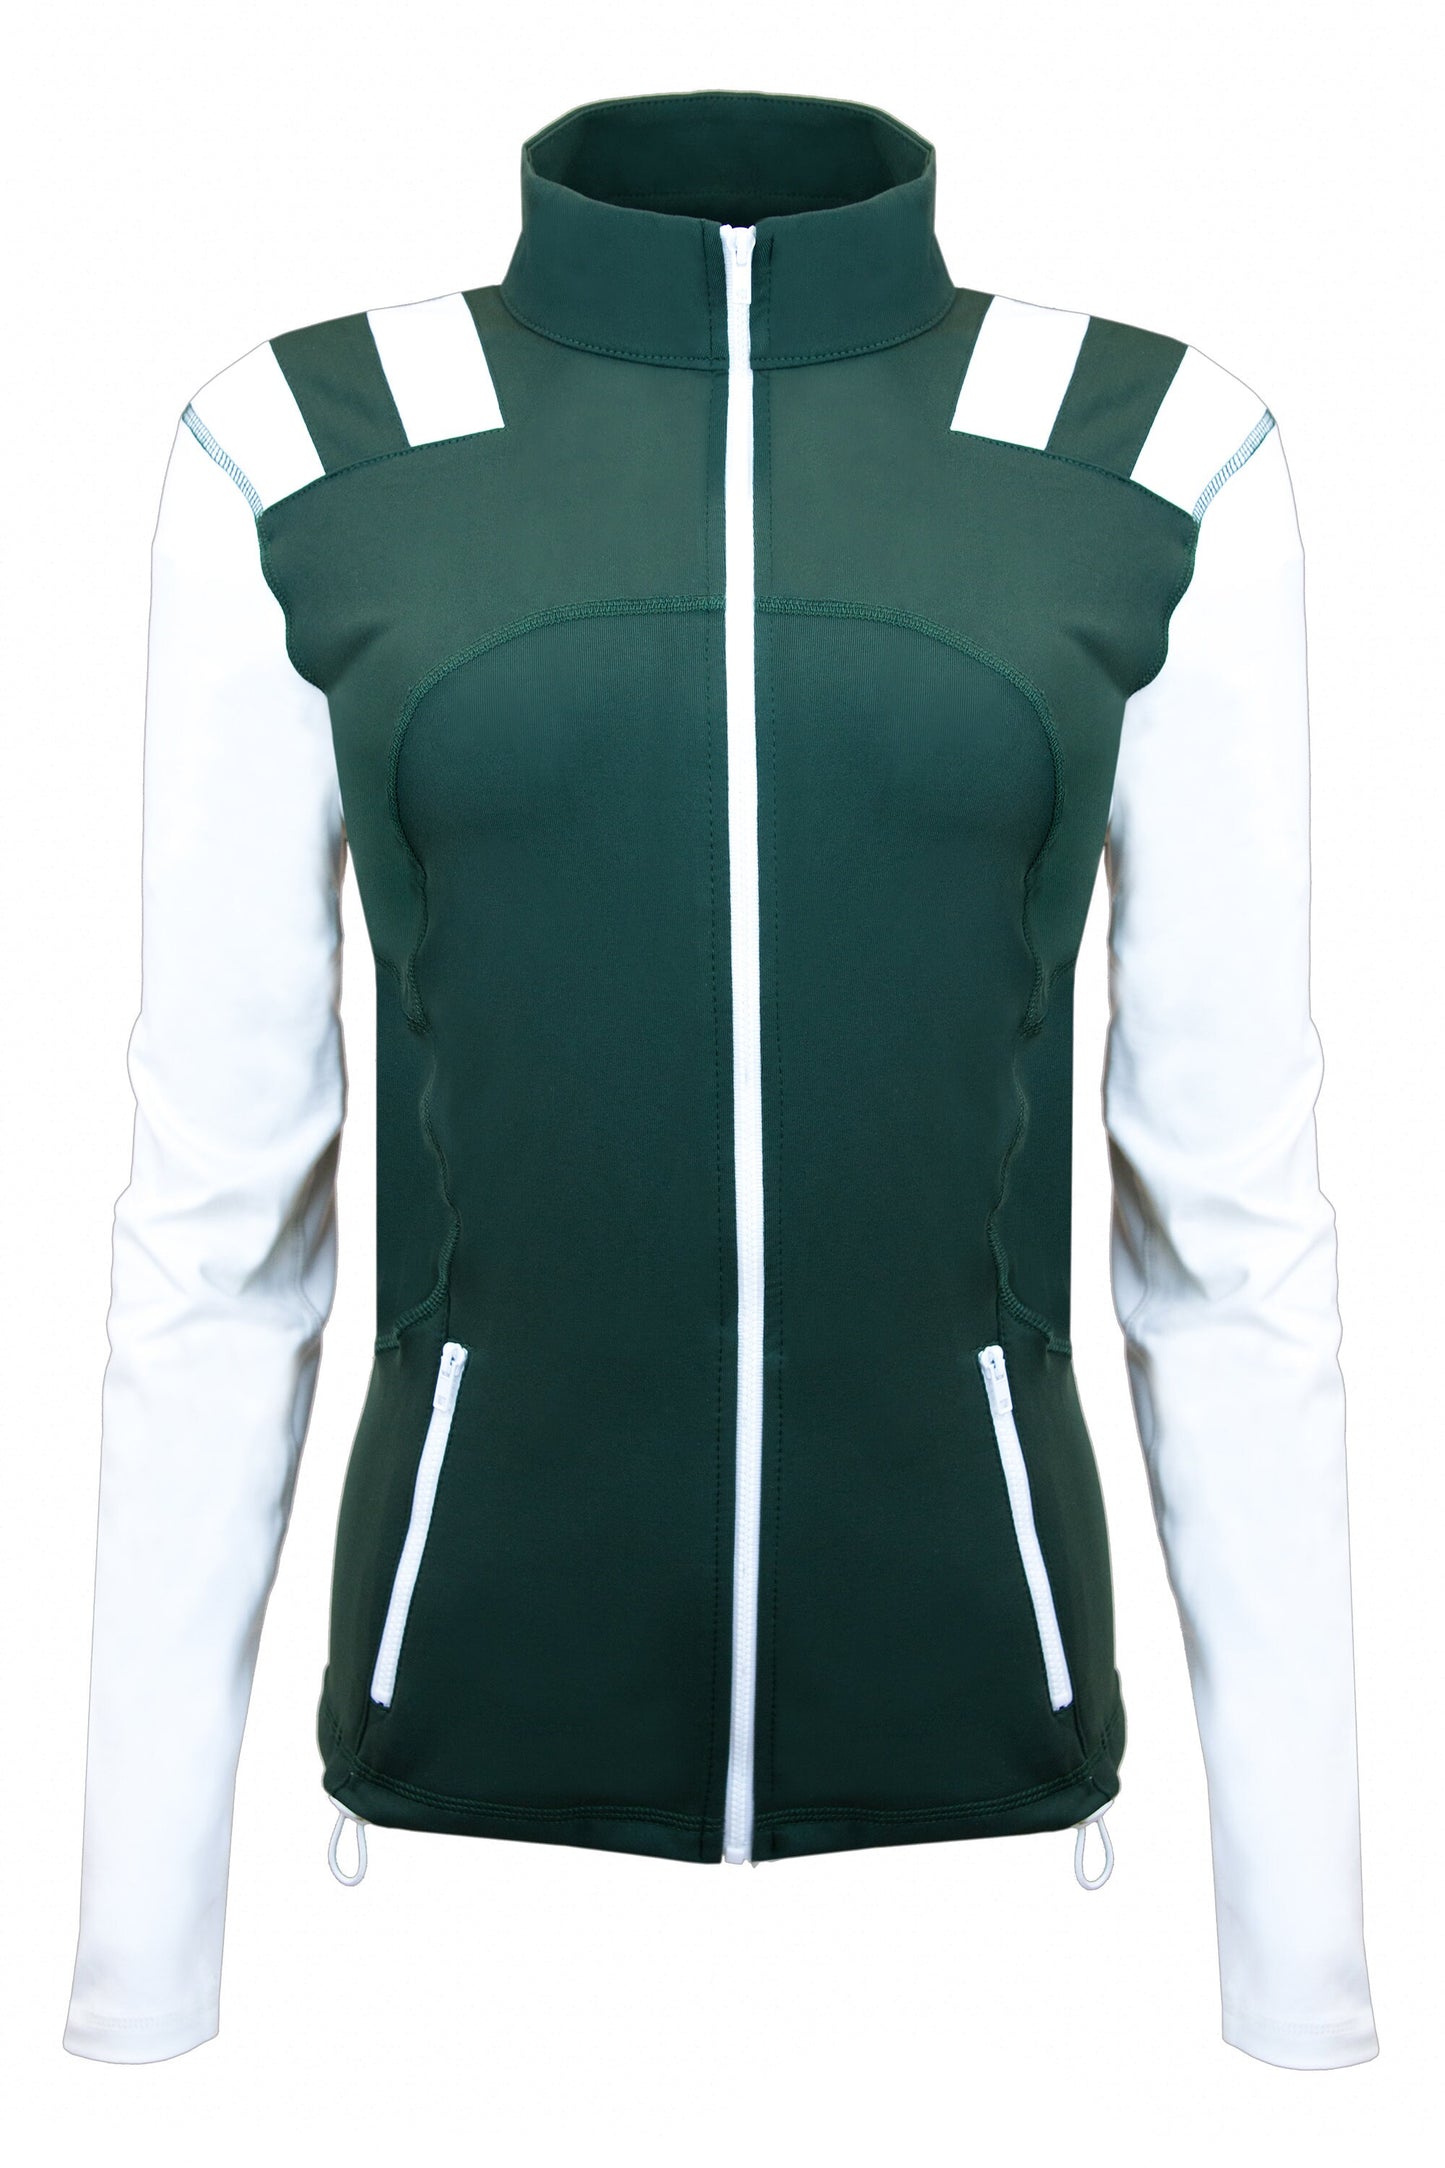 Green and White Striped Women's Yoga Track Jacket